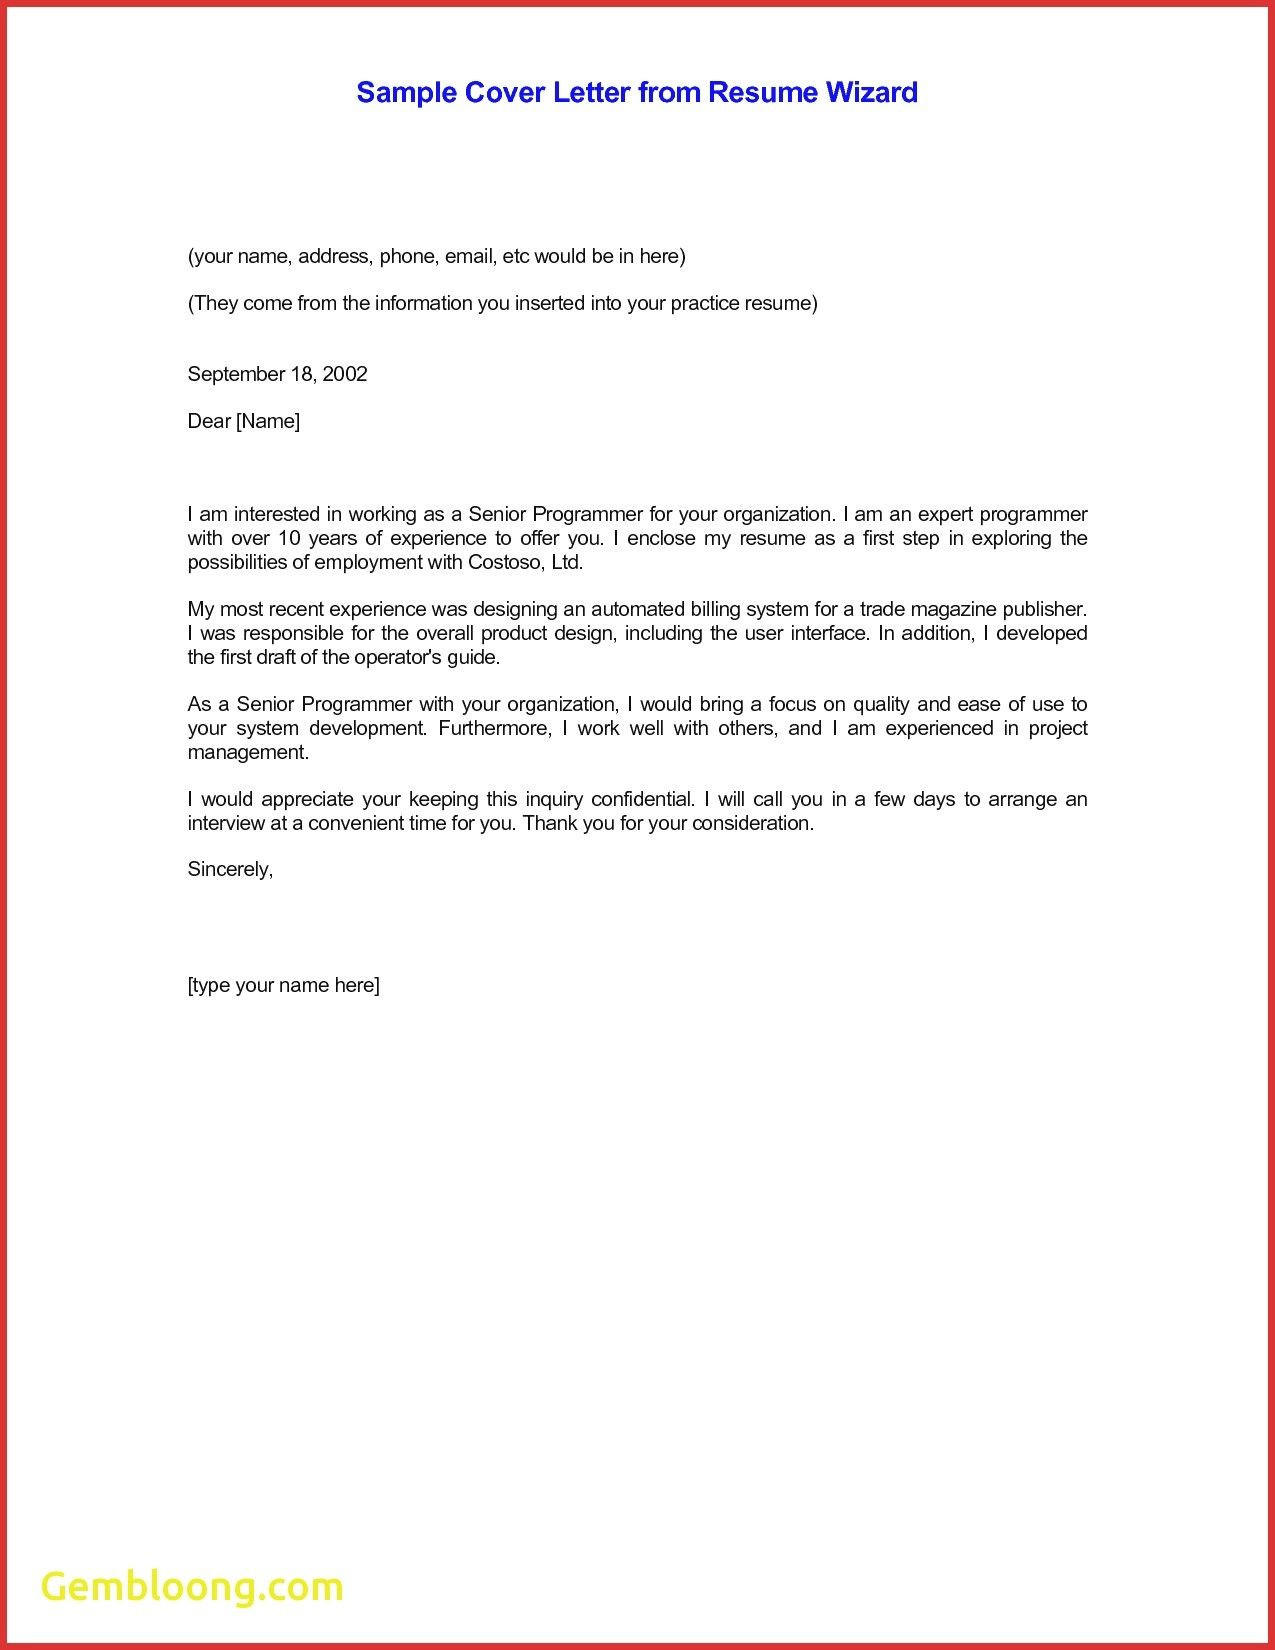 Generic Cover Letter Template for Resume Email Cv Cover Letter Template – Resume format Cover Letter for …